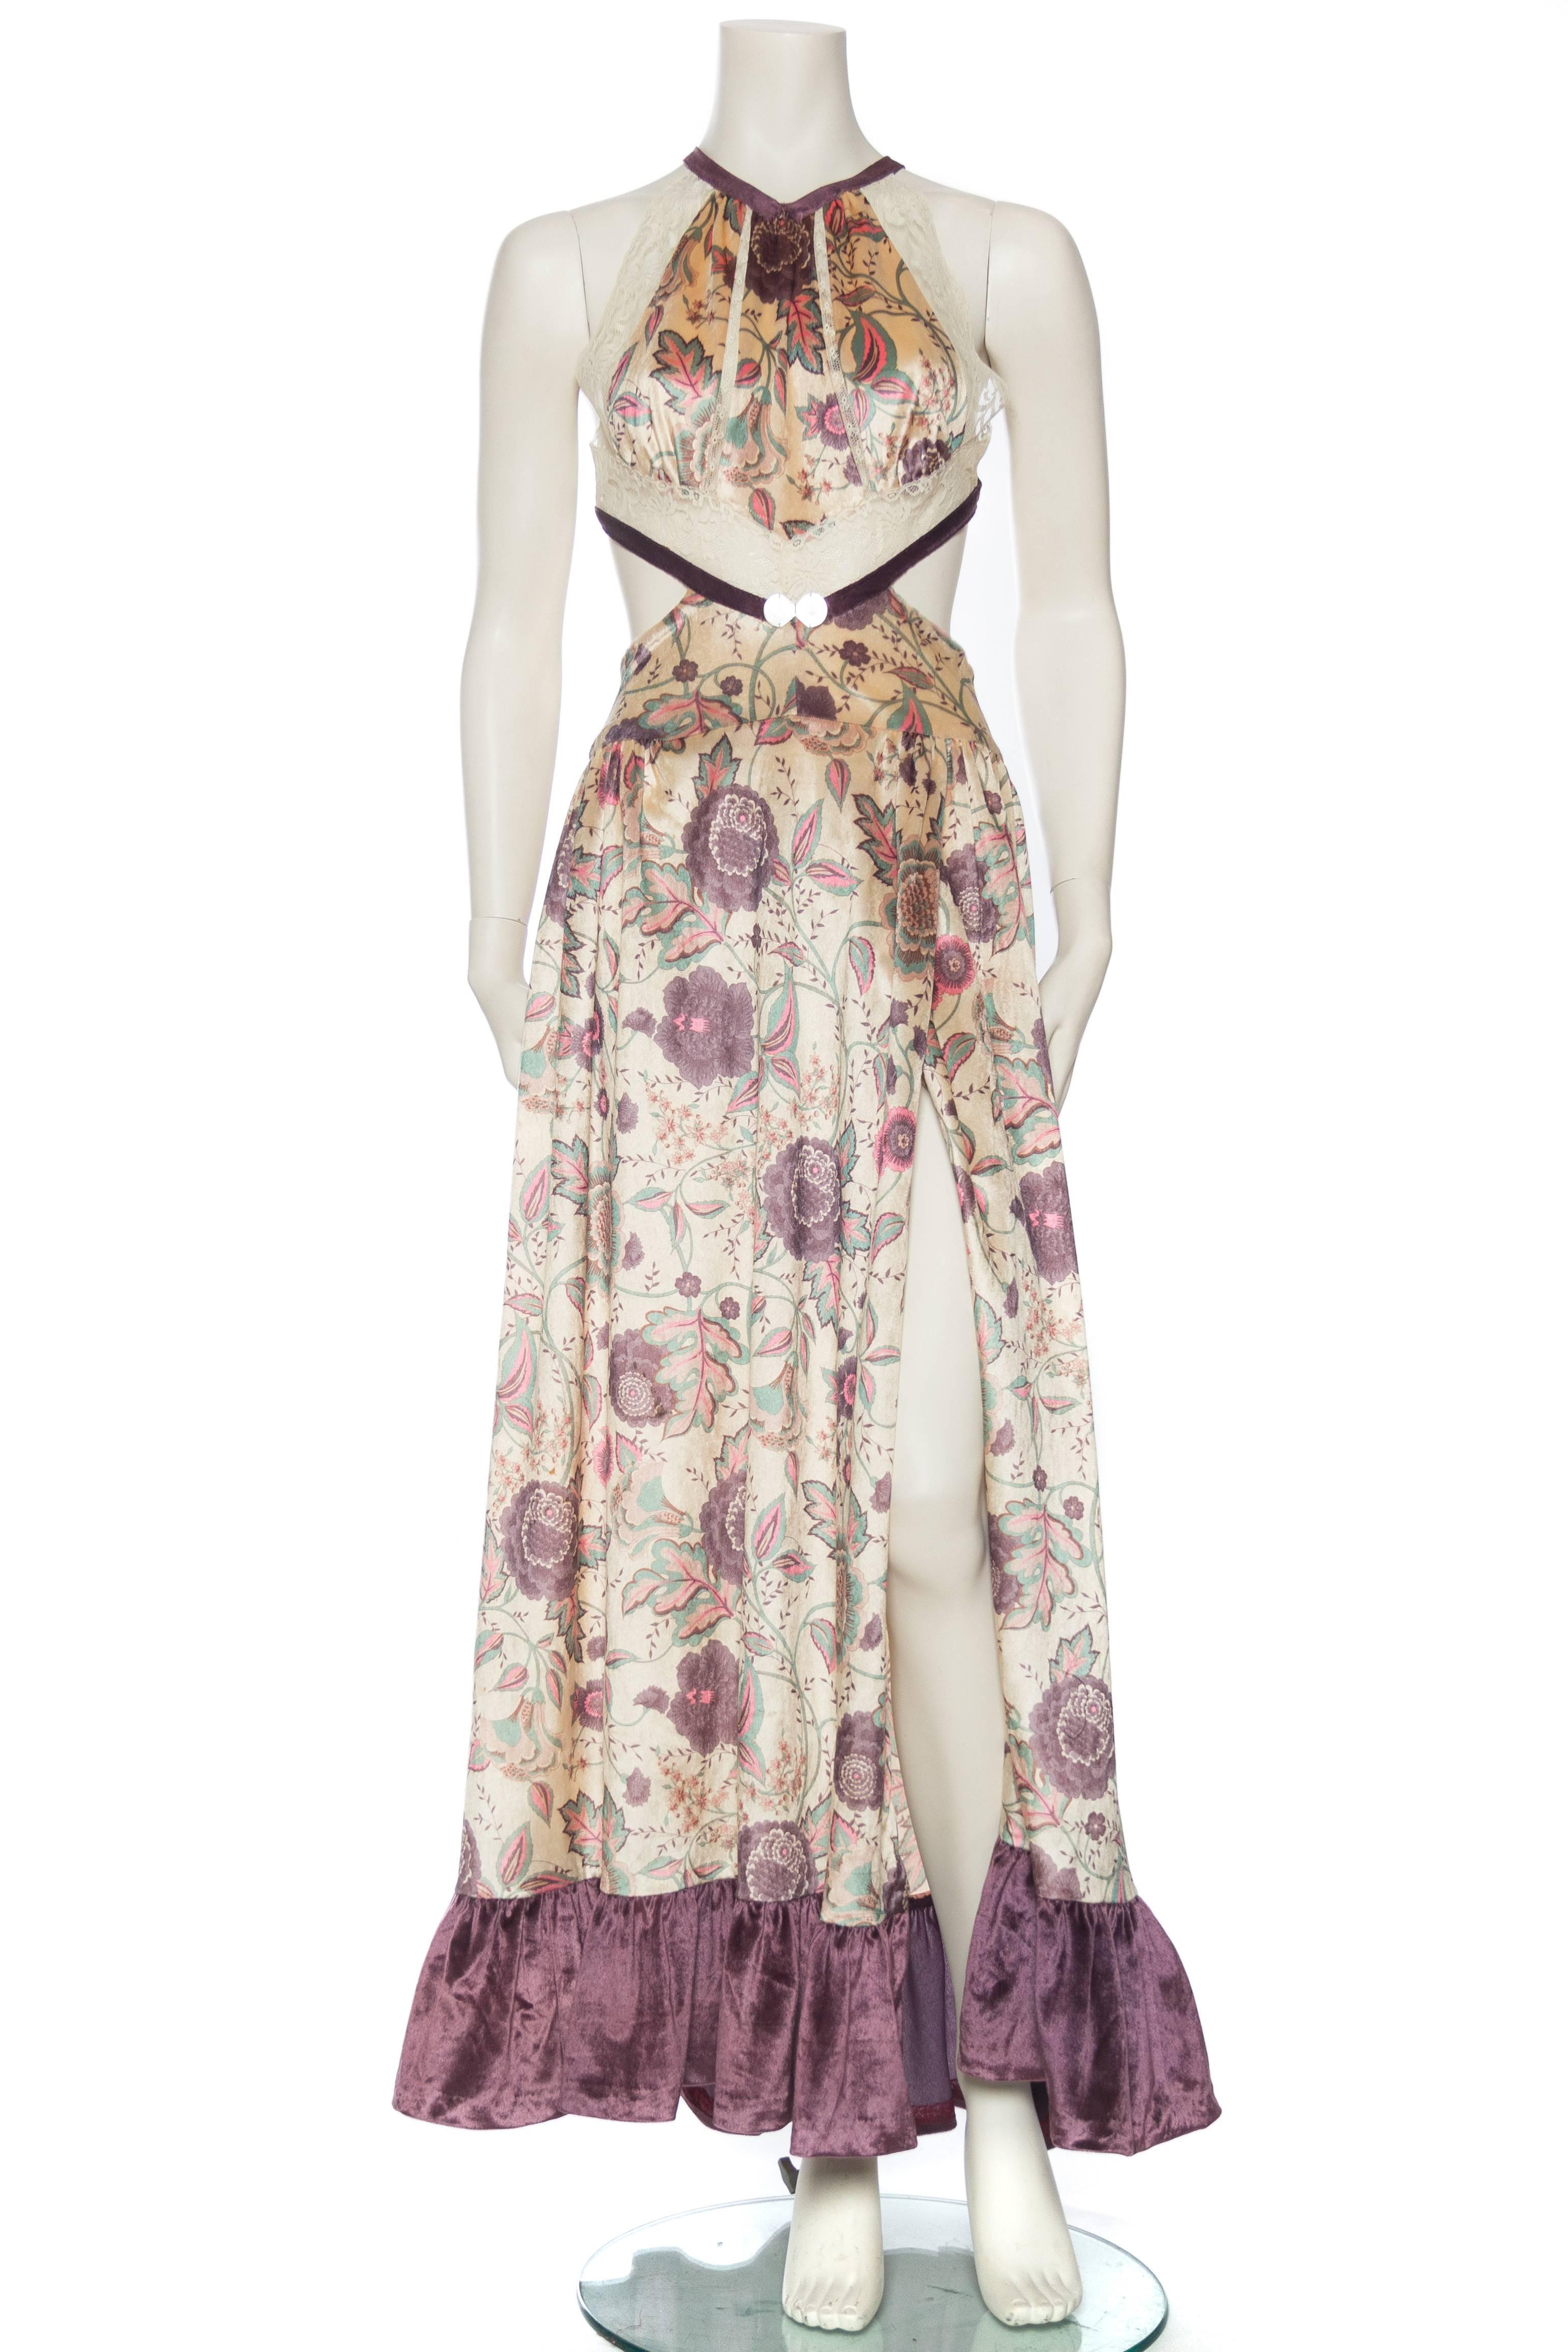 Made from 1970s printed silk velvet and Victorian lace. The cape can be worn snapped in on the sides to fit like a sleeve. Sexy wrap front design to the skirt for a flash of skin with a cut out back and zip in the center back. Antique art deco hand